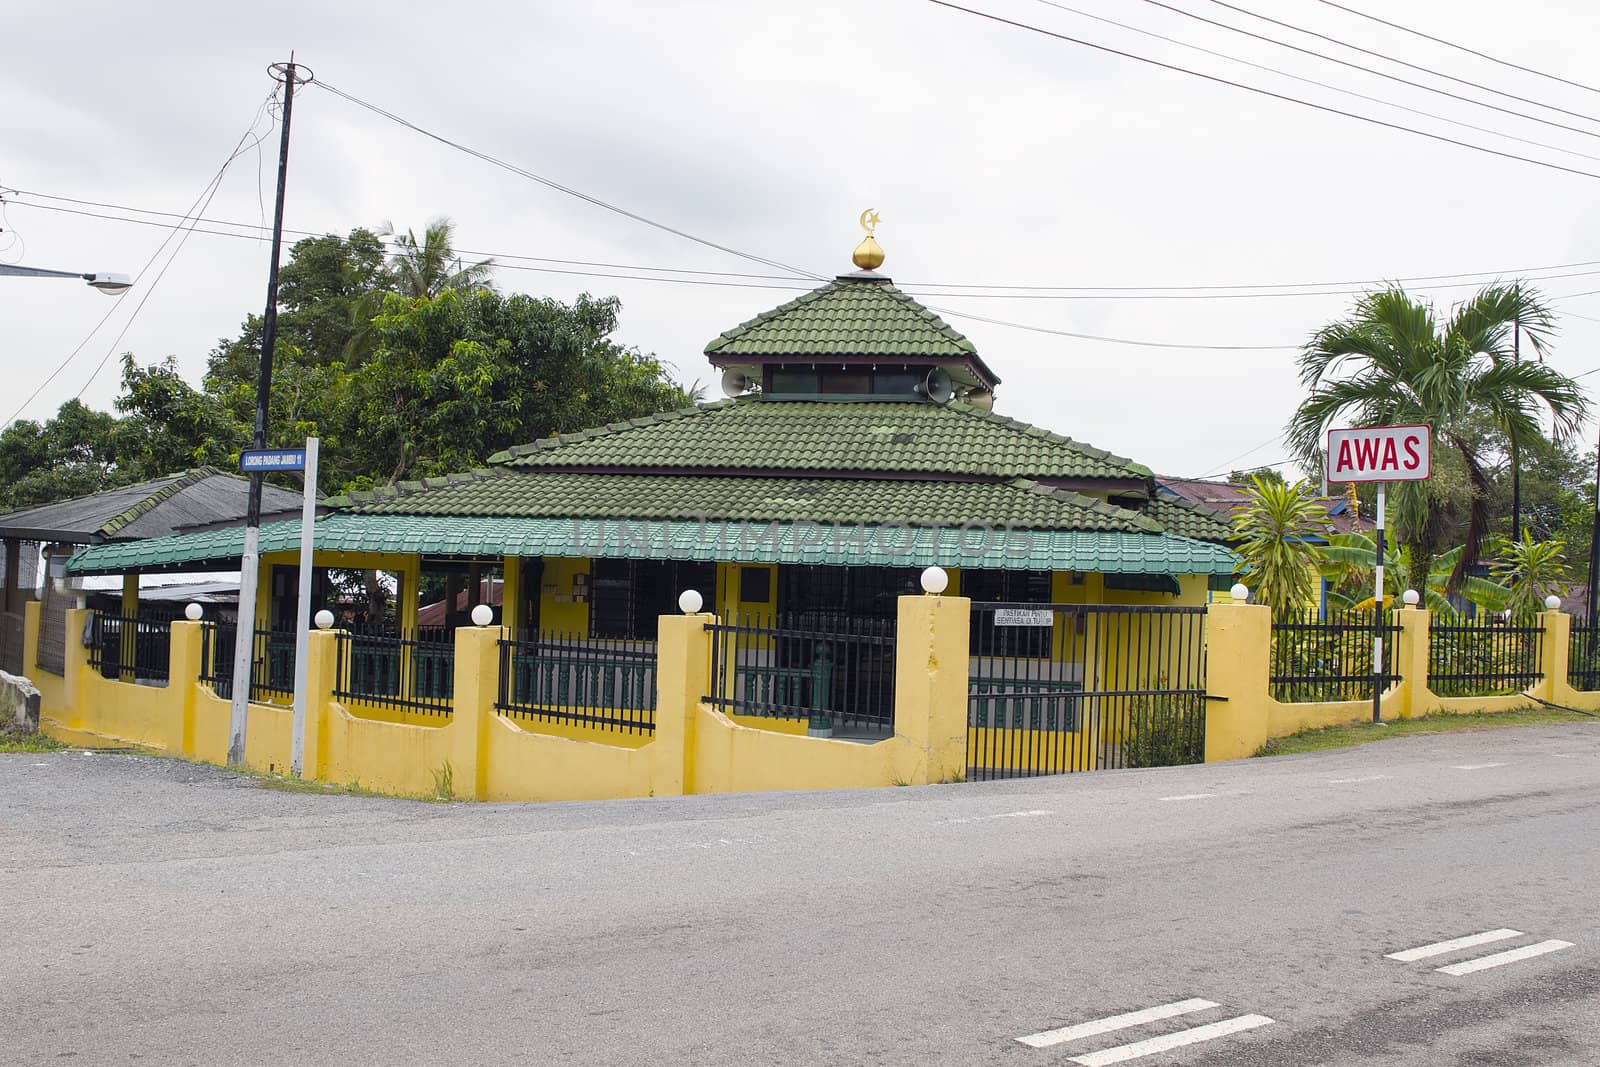 Local Mosque in Small Village Along the Road in Malacca Malaysia